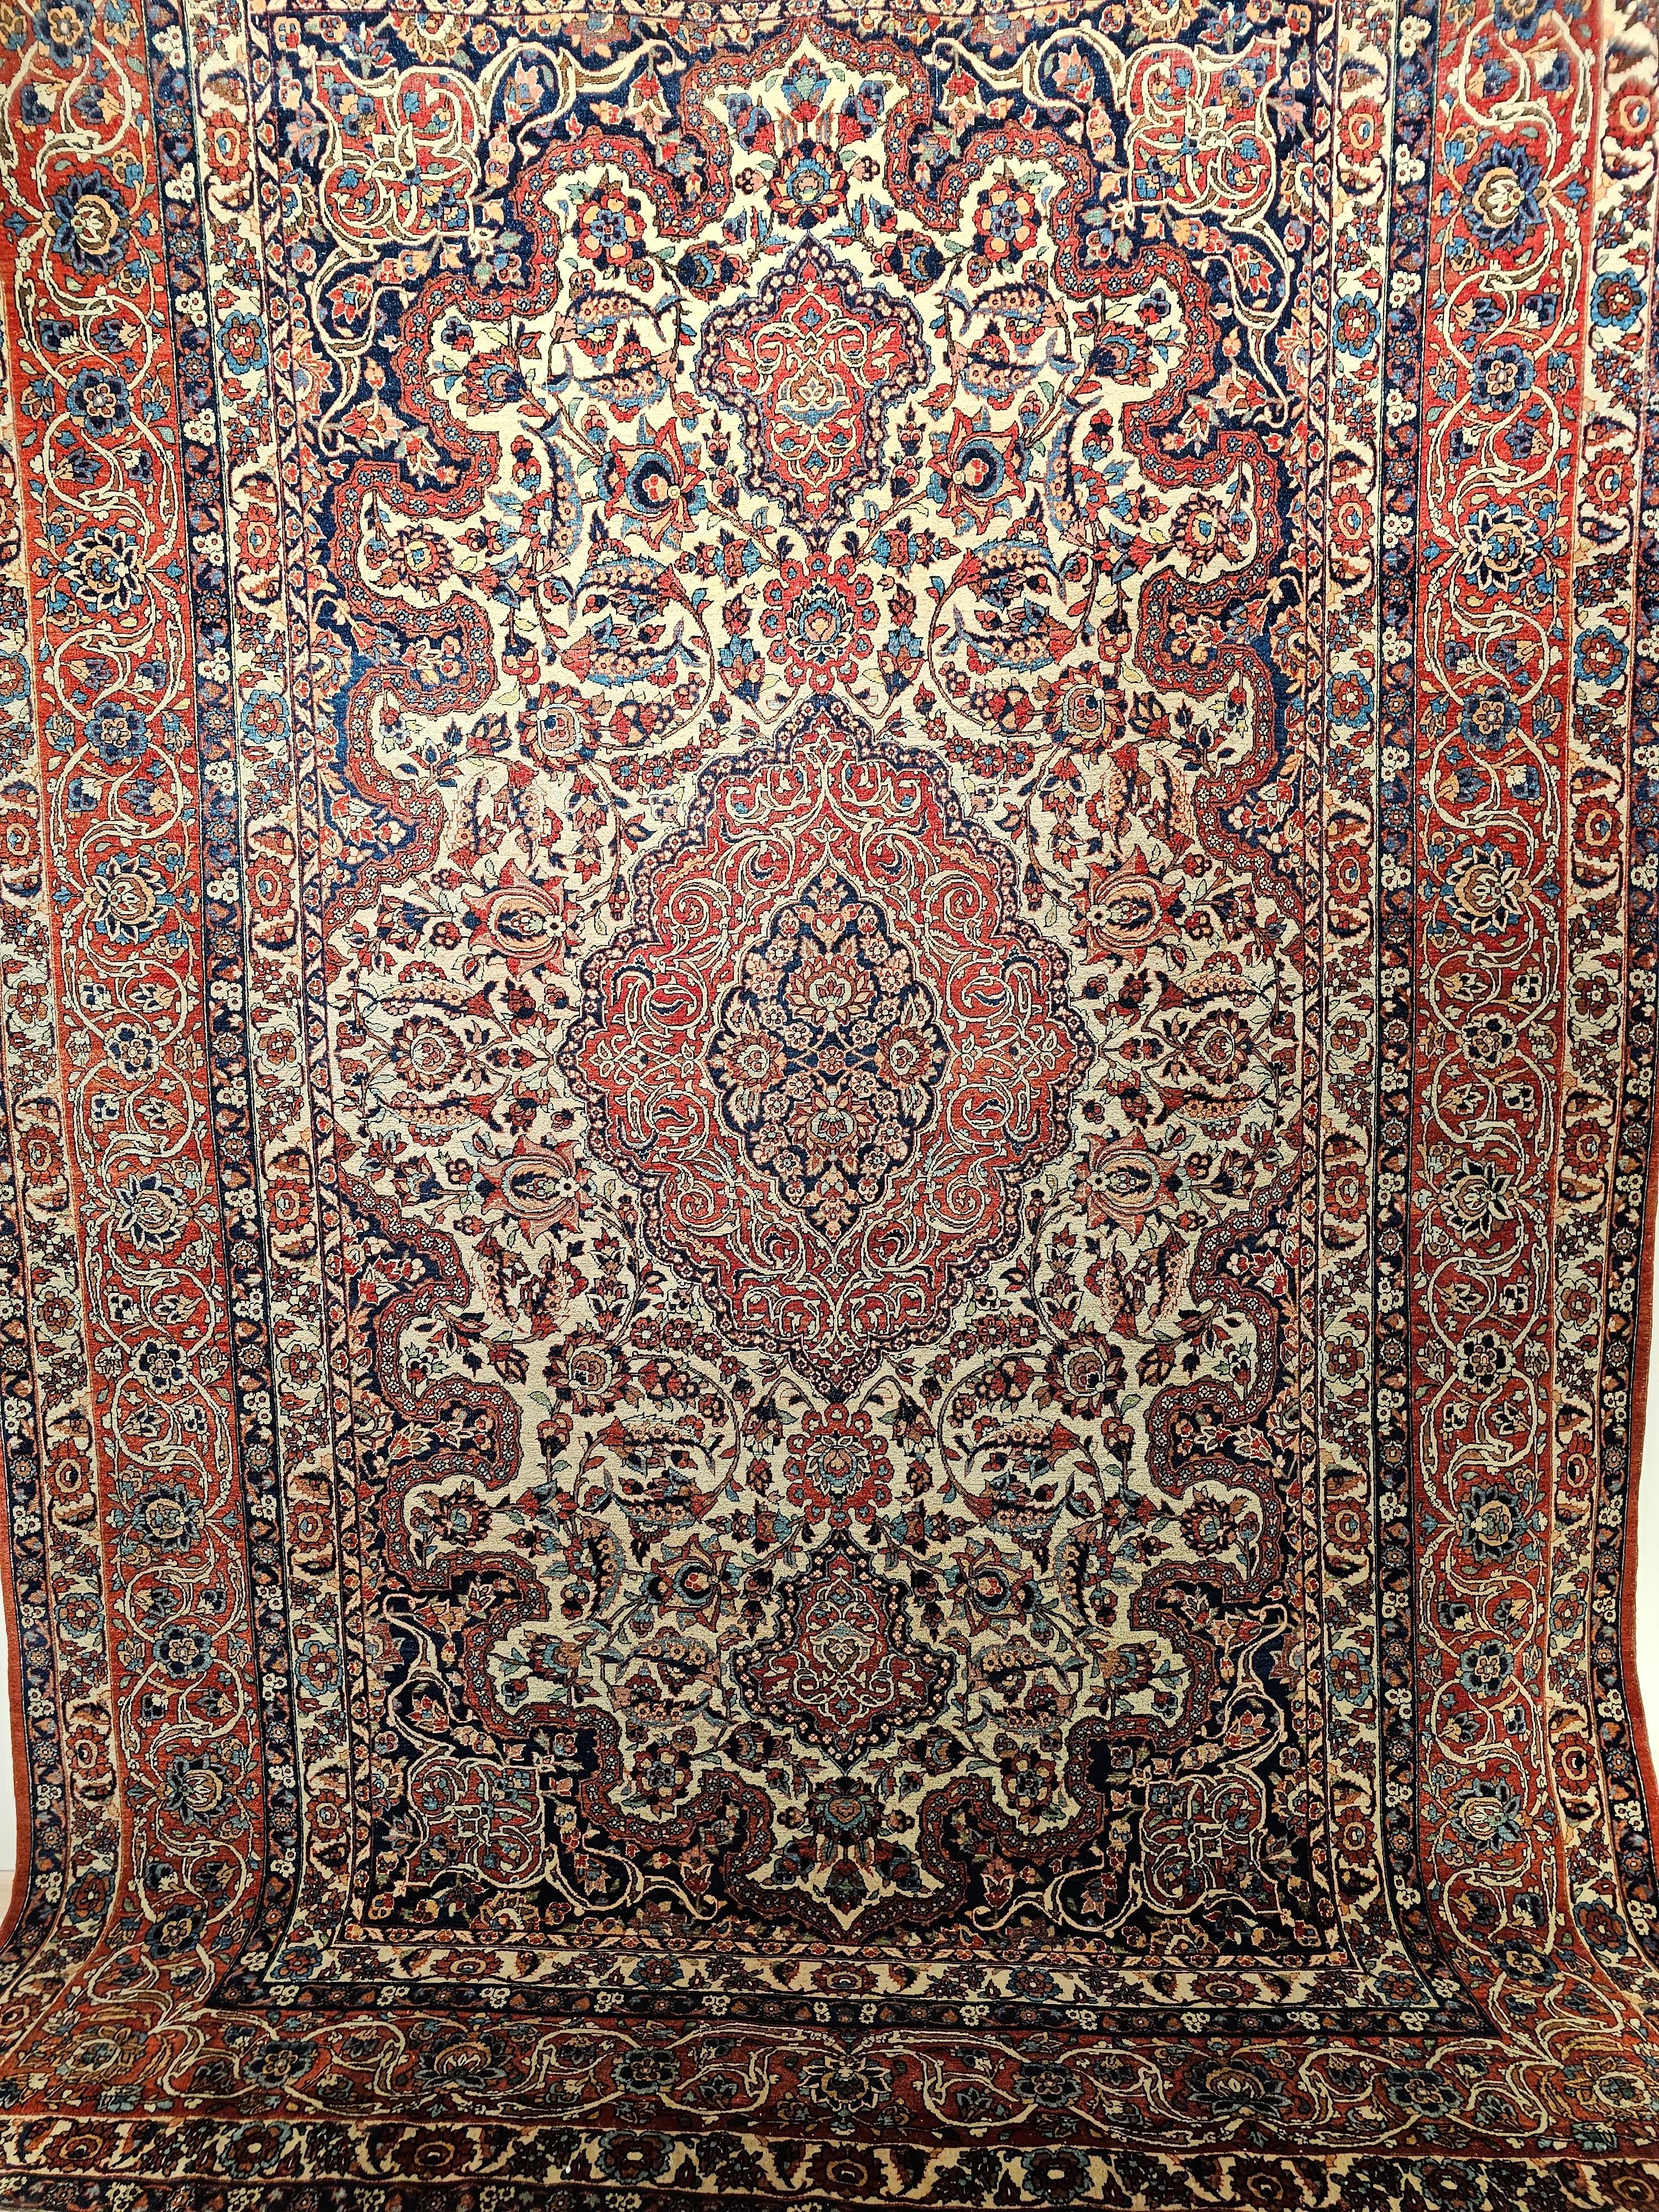 Vintage  room-size Persian Isfahan rug from the 1st quarter of the 1900s.  The beautiful hand-knotted  rug has a very fine weave and very high knot count.  The pattern is the classic Shah Abbas large format “Leaf and Sickle” design with scrolling